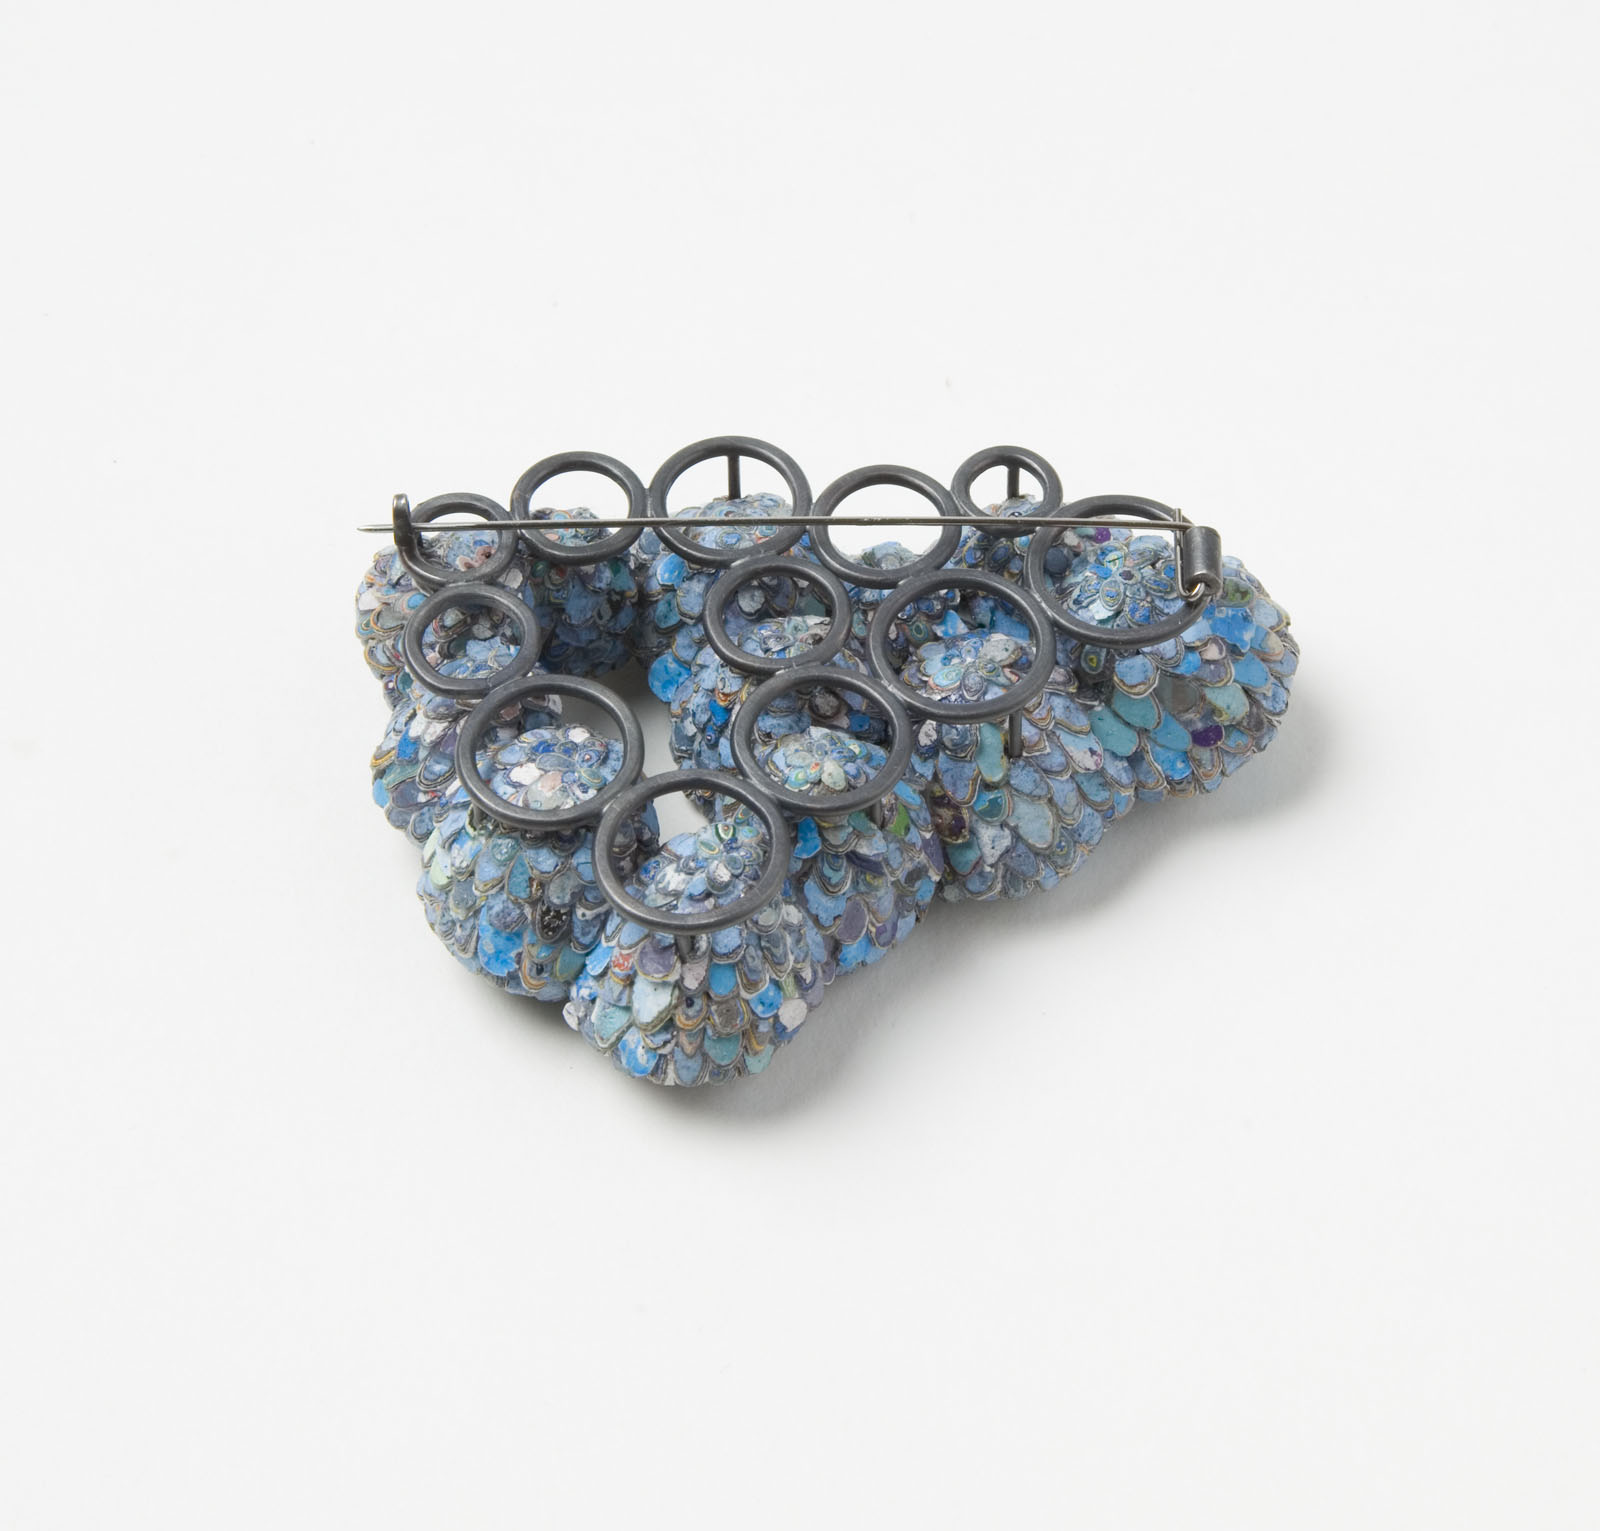 "The Secret Keepers (Blue 1)" I Brooch, 2016 I Seed pods, graffiti, glass, silver, stainless steel I Photo: Mirei Takeuchi